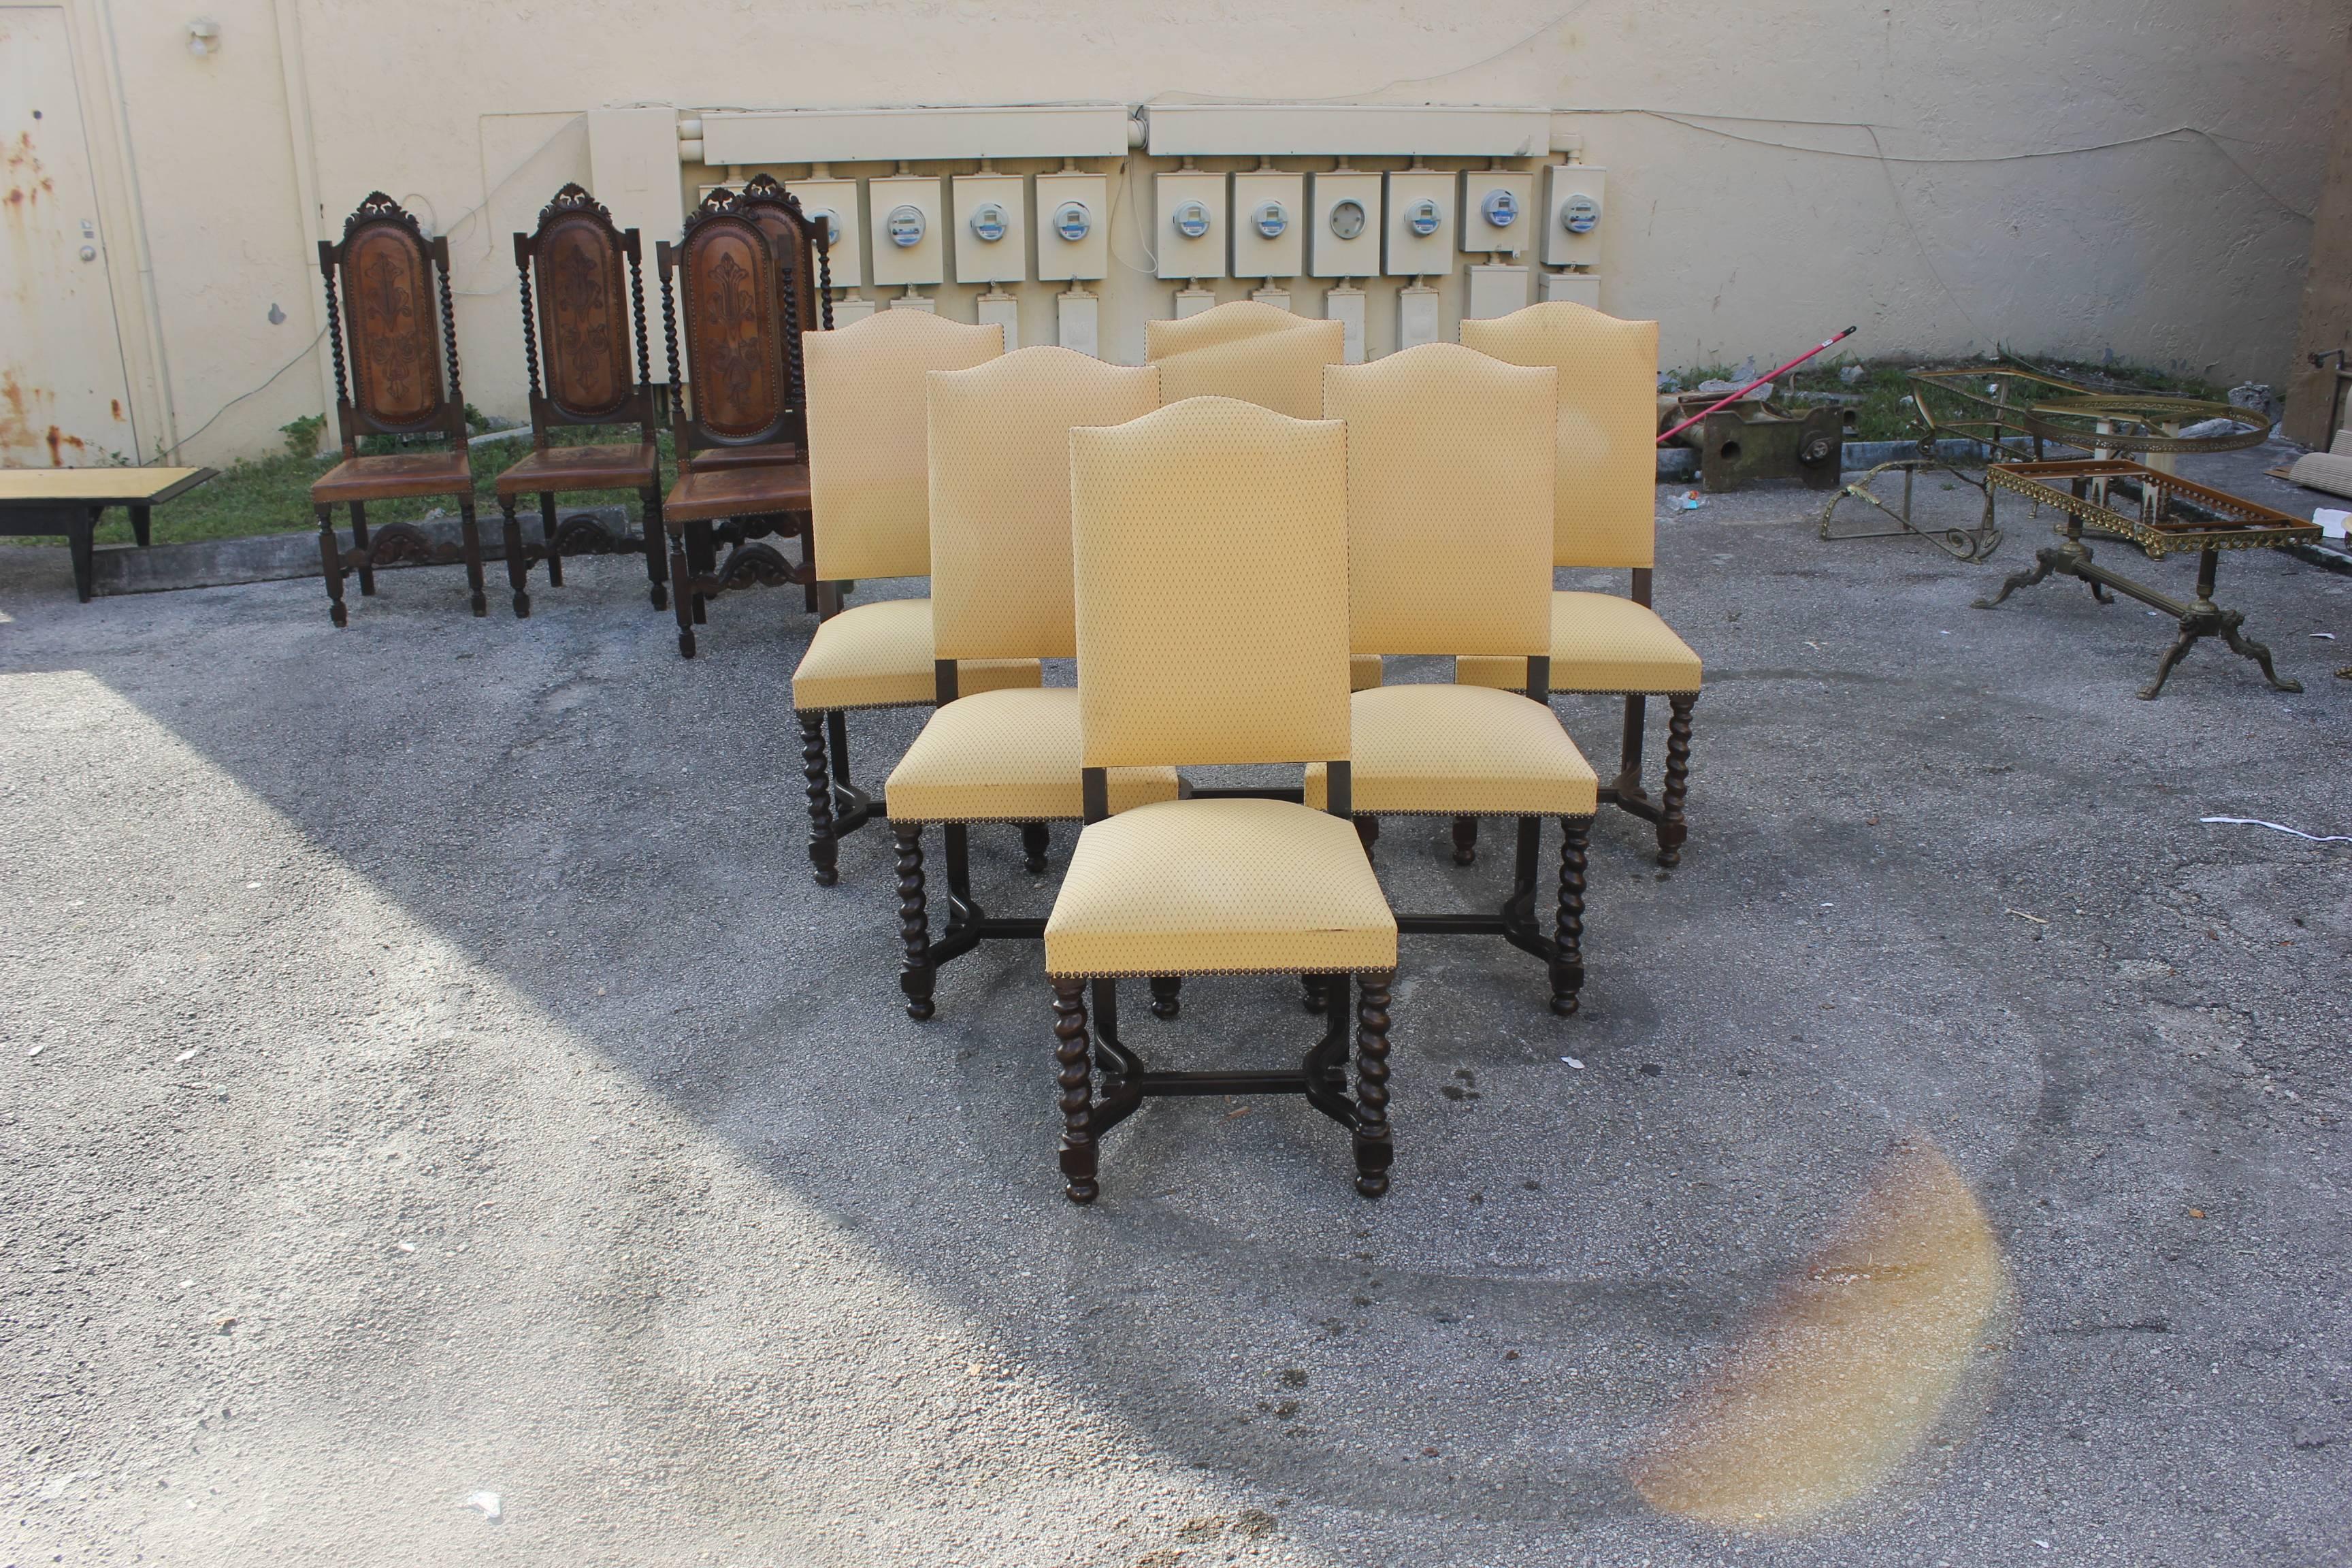 Fine set of six Louis XIII style barley twist dining chairs with chapeau de gendarme backs, circa 1880s. Vintage fabric upholstery with nailheads, solid walnut chair frames are in excellent condition. From South France, Lyon. (Re-upholstery is